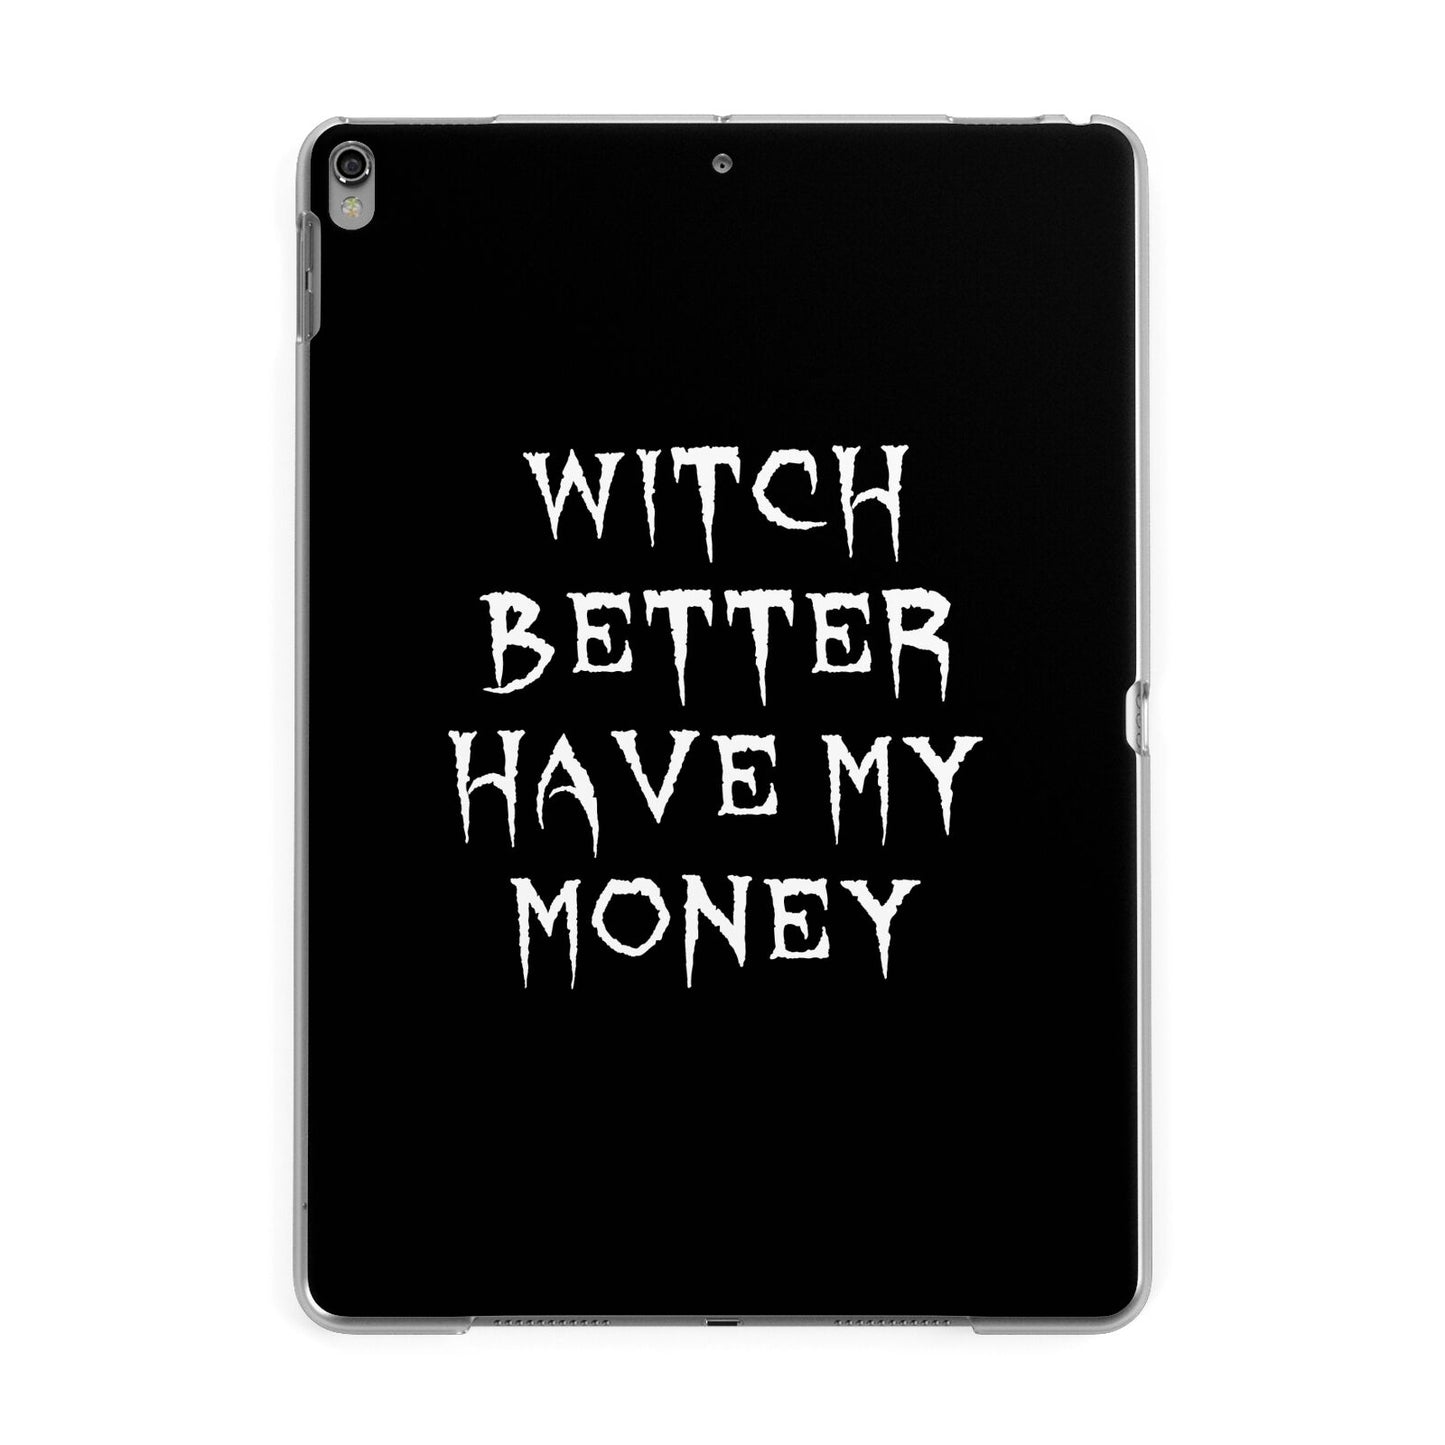 Witch Better Have My Money Apple iPad Grey Case